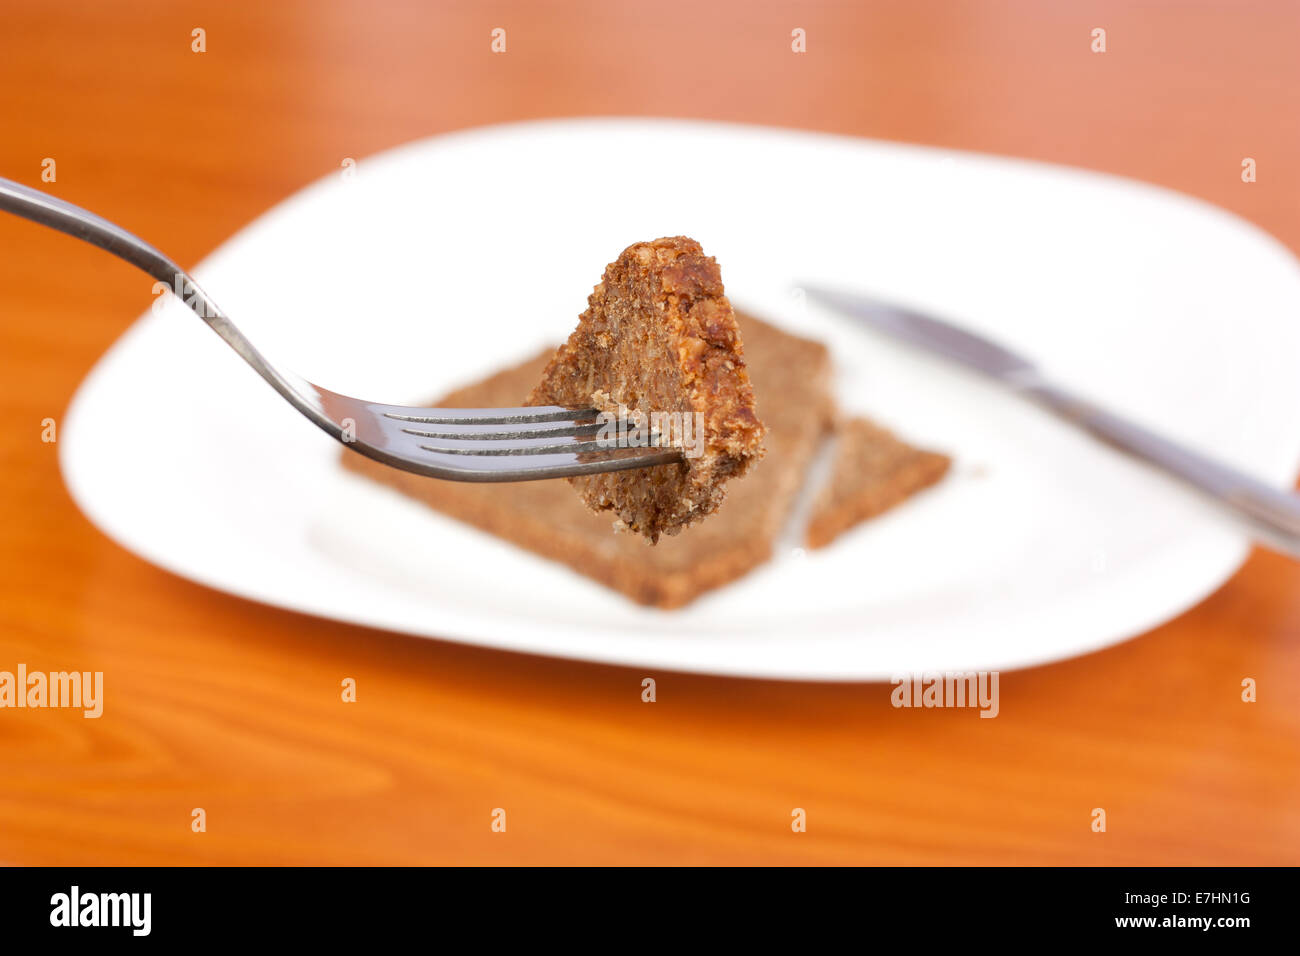 Rye bread in fork and one plate and knife in background Stock Photo